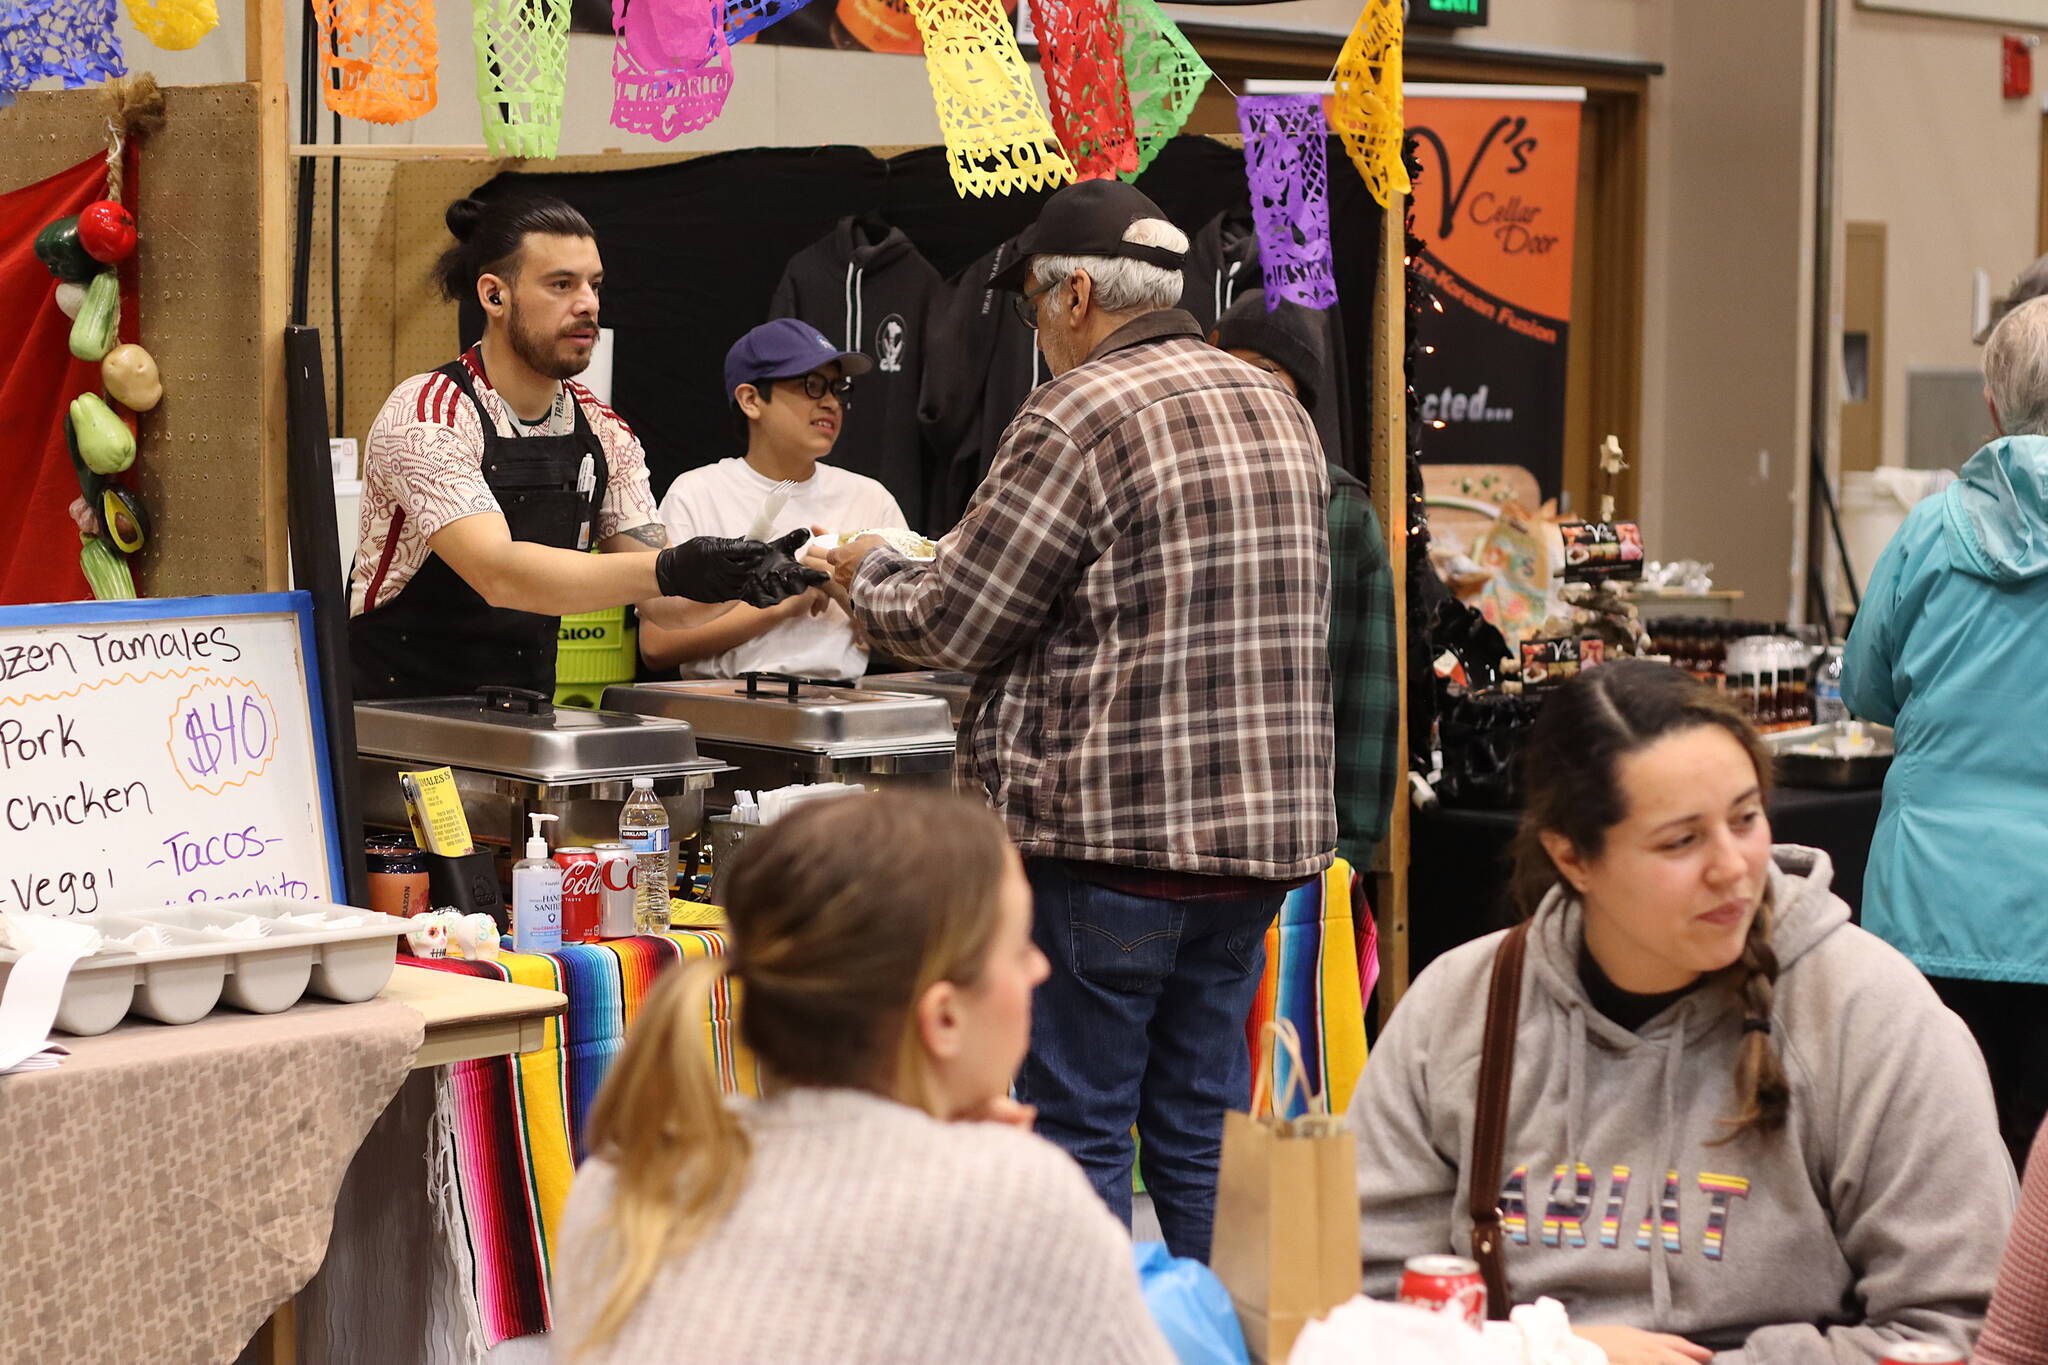 A food vendor sells tamales to a customer Saturday at the Juneau Public Market. Locally-made hot foods as well as gifts such as baked goods are being sold by vendors through the three buildings where market events are taking place. (Mark Sabbatini / Juneau Empire)